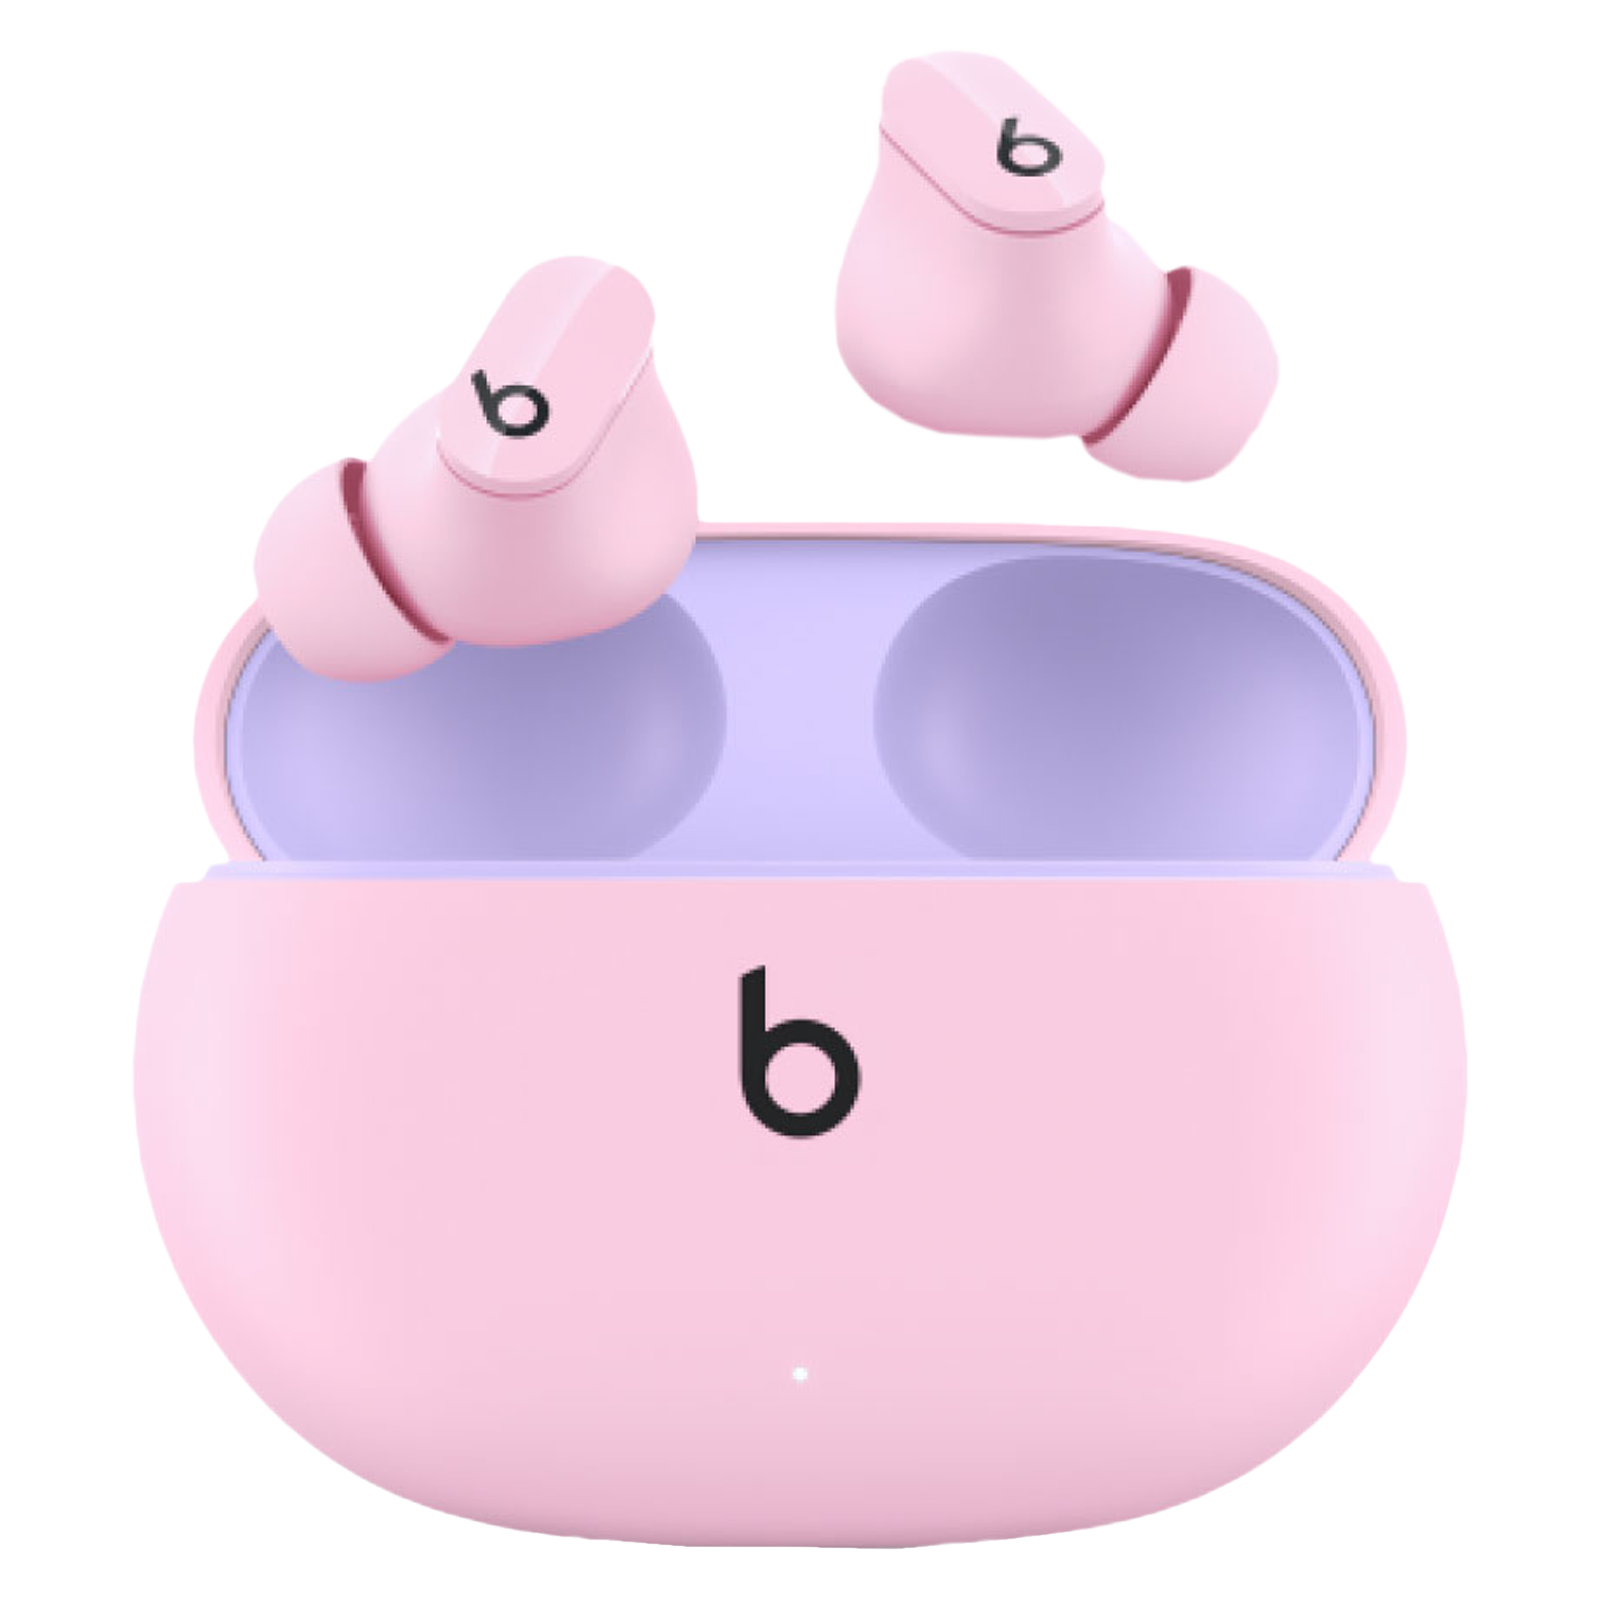 Beats Studio Buds Bluetooth Truly Wireless Earbuds with Mic (Pink)